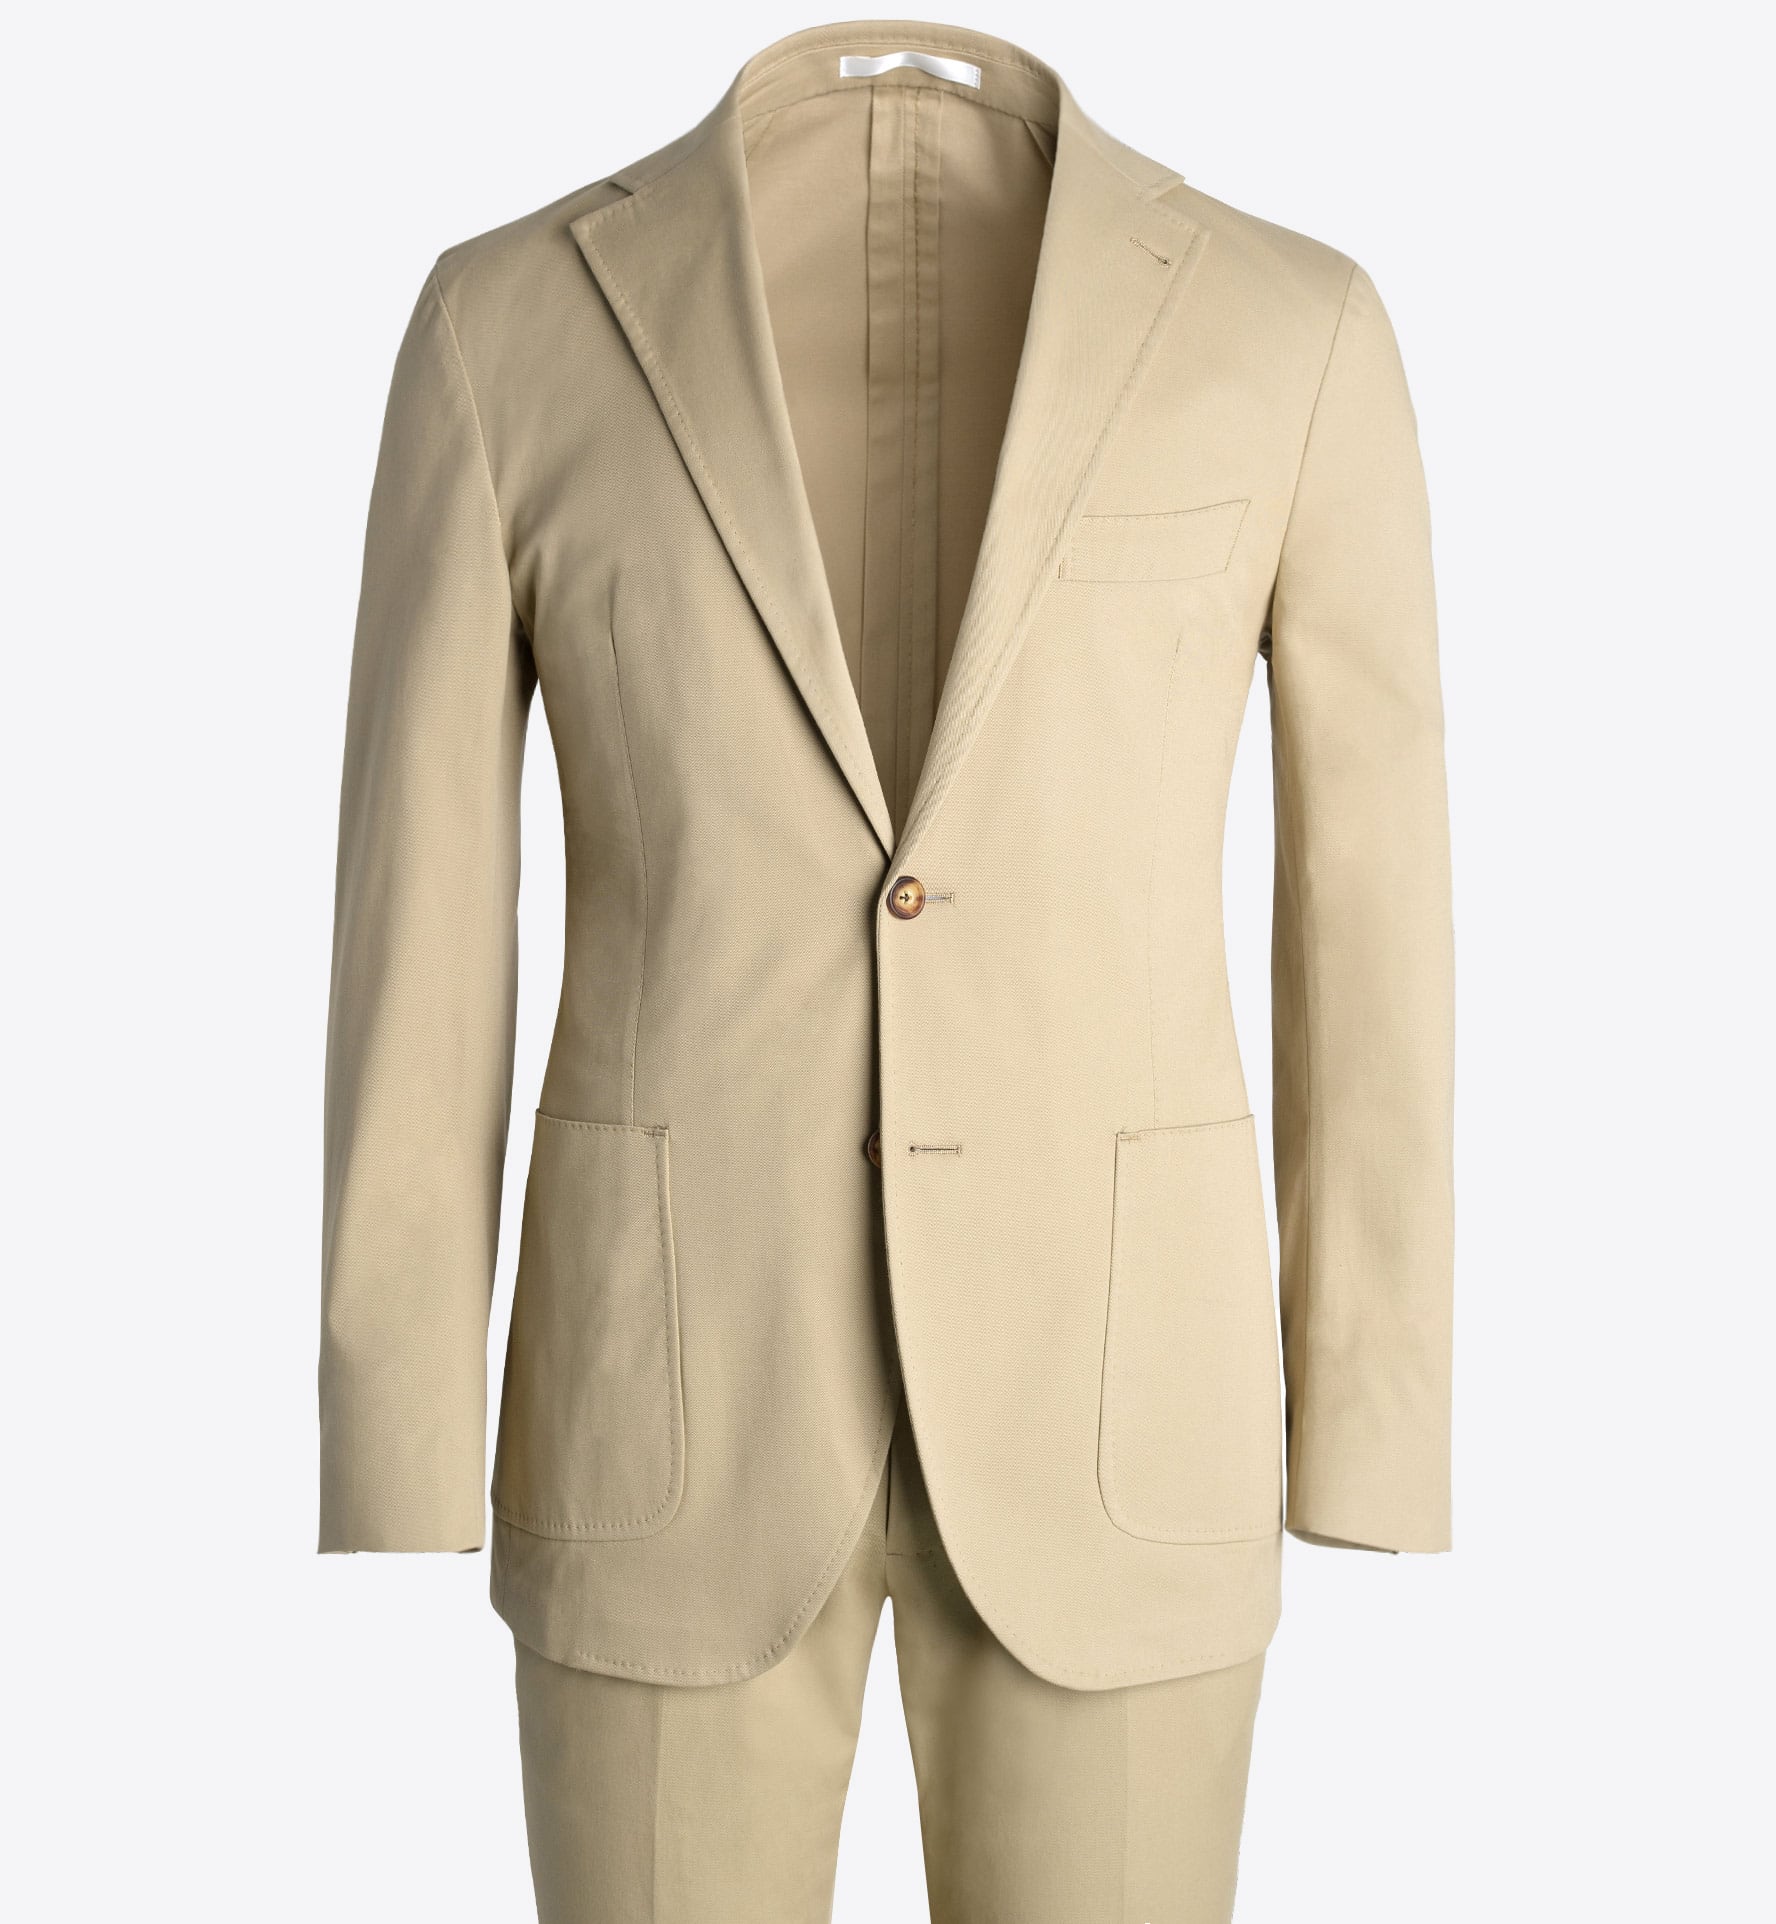 Zoom Image of Waverly Beige Supima Stretch Cotton Twill Suit